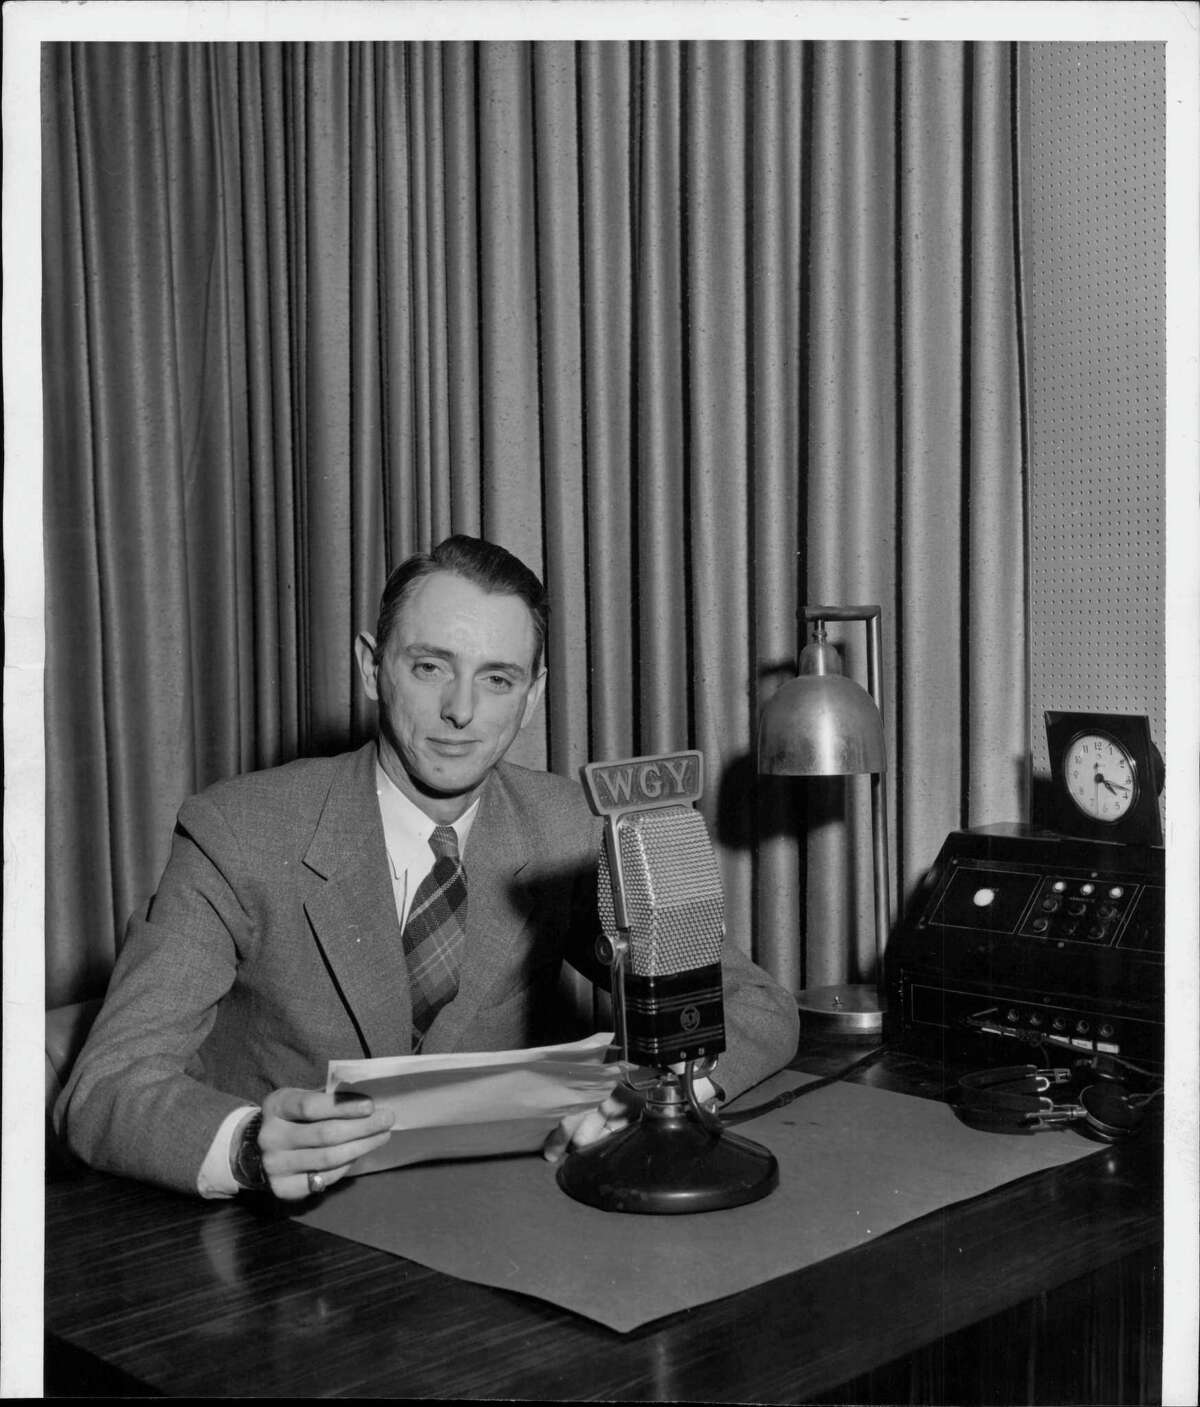 WGY Radio Farm Editor Don Tuttle ready to broadcast. July 30, 1958 (Times Union Archive)